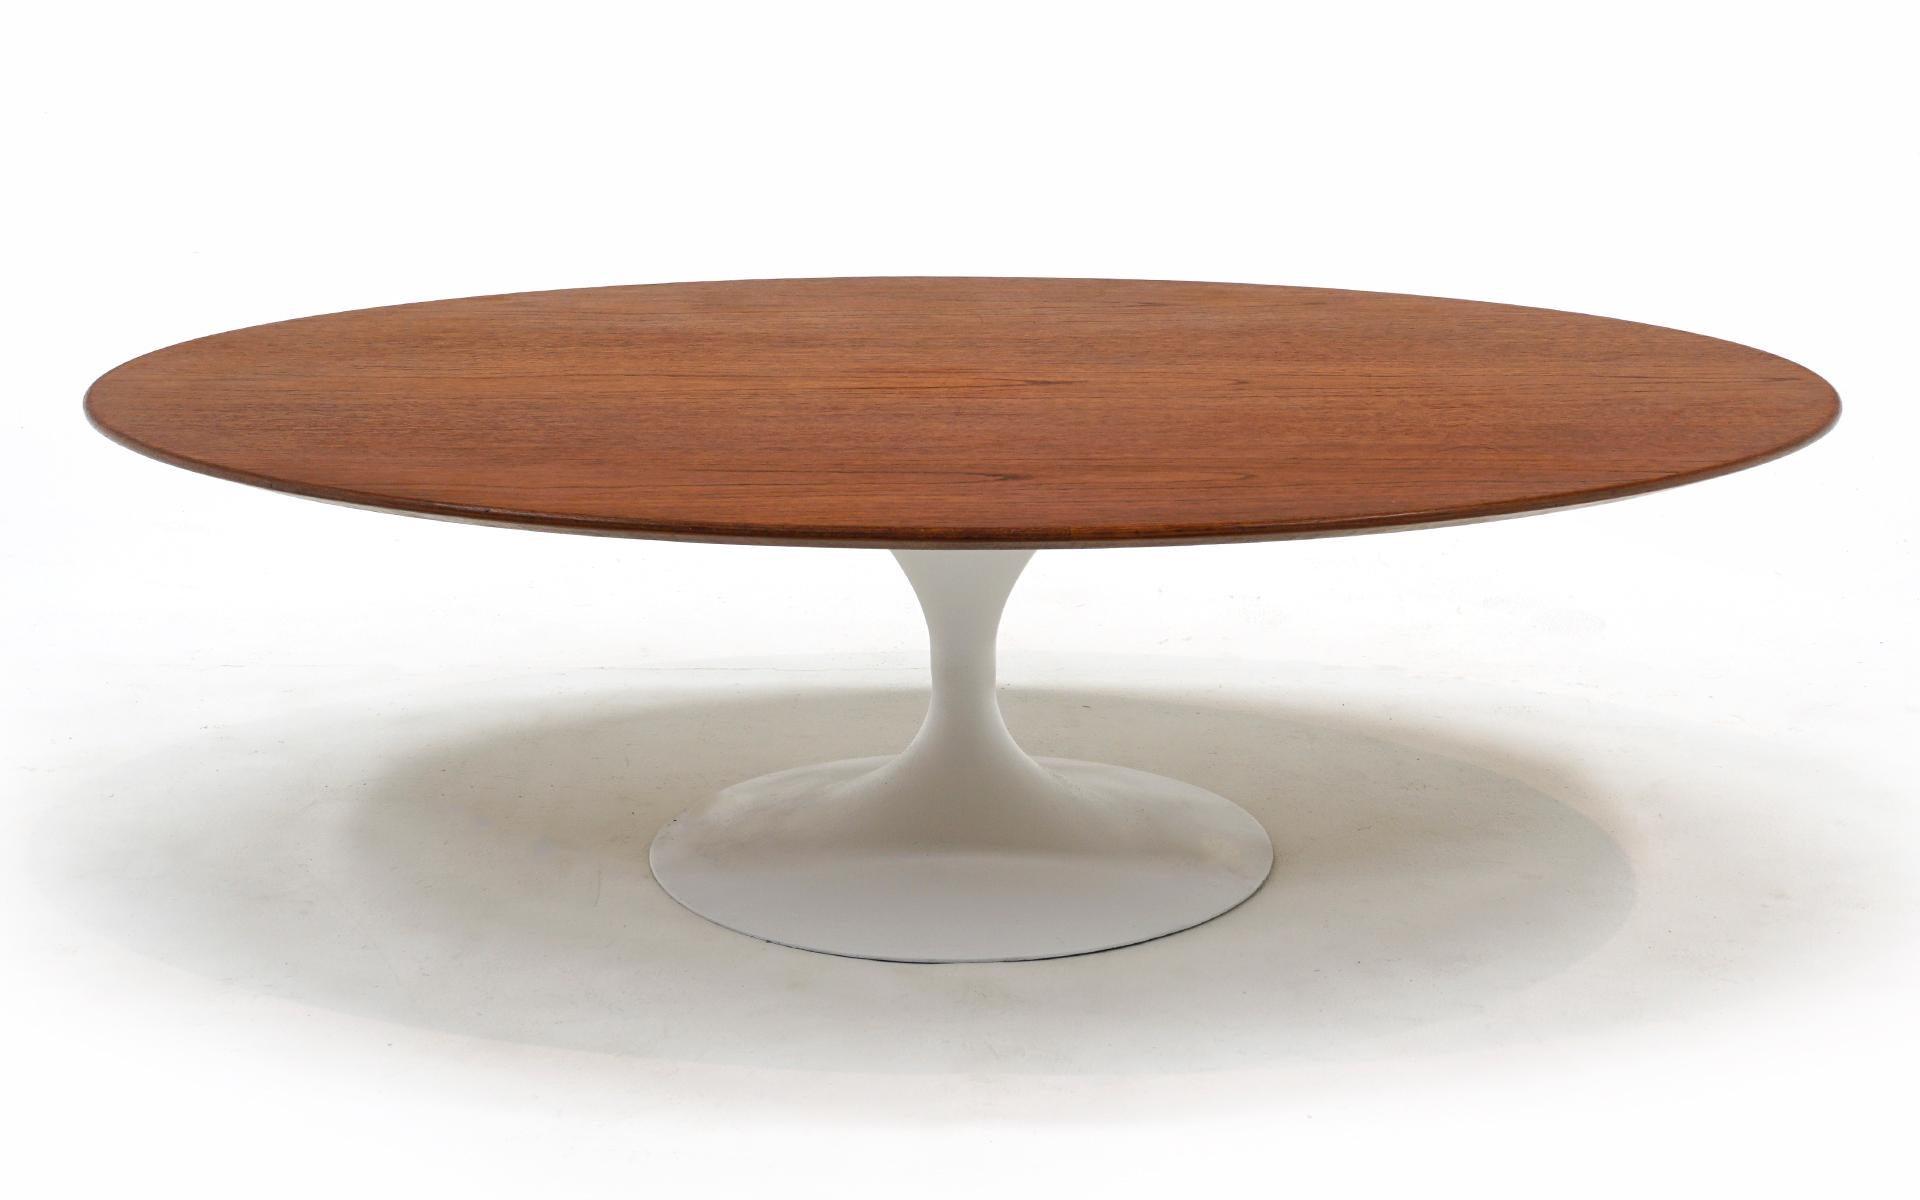 Early, out of production fifty four inch wide oval coffee table with white tulip base designed by Eero Saarinen and produced by Knoll, 1960s.  The table features a walnut top and painted cast iron base.  The early models have the cast iron base